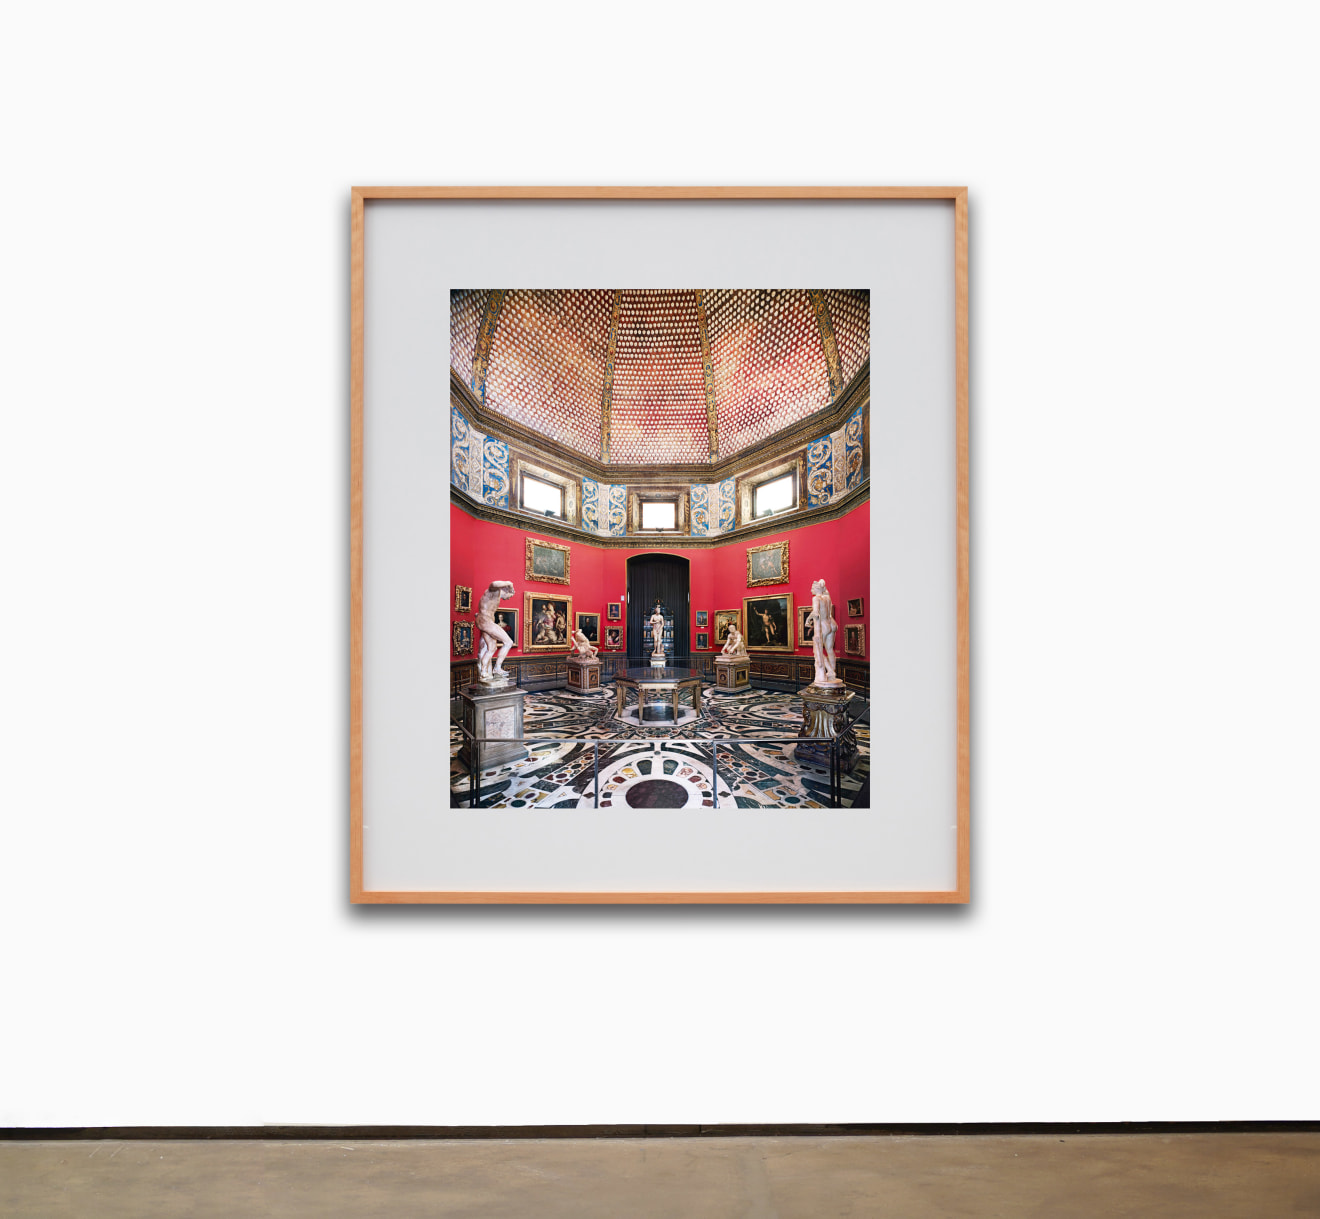 Candida H&ouml;fer Uffizi Firenze III 2008 Signed, titled and numbered on label, verso C-print paper: 70 7/8 x 60 1/4 inches (180 x 153 cm) framed: 72 9/16 x 61 15/16 x 2 inches (184.3 x 157.3 x 5.1 cm) edition of 6 with 3 APs (#1/6)